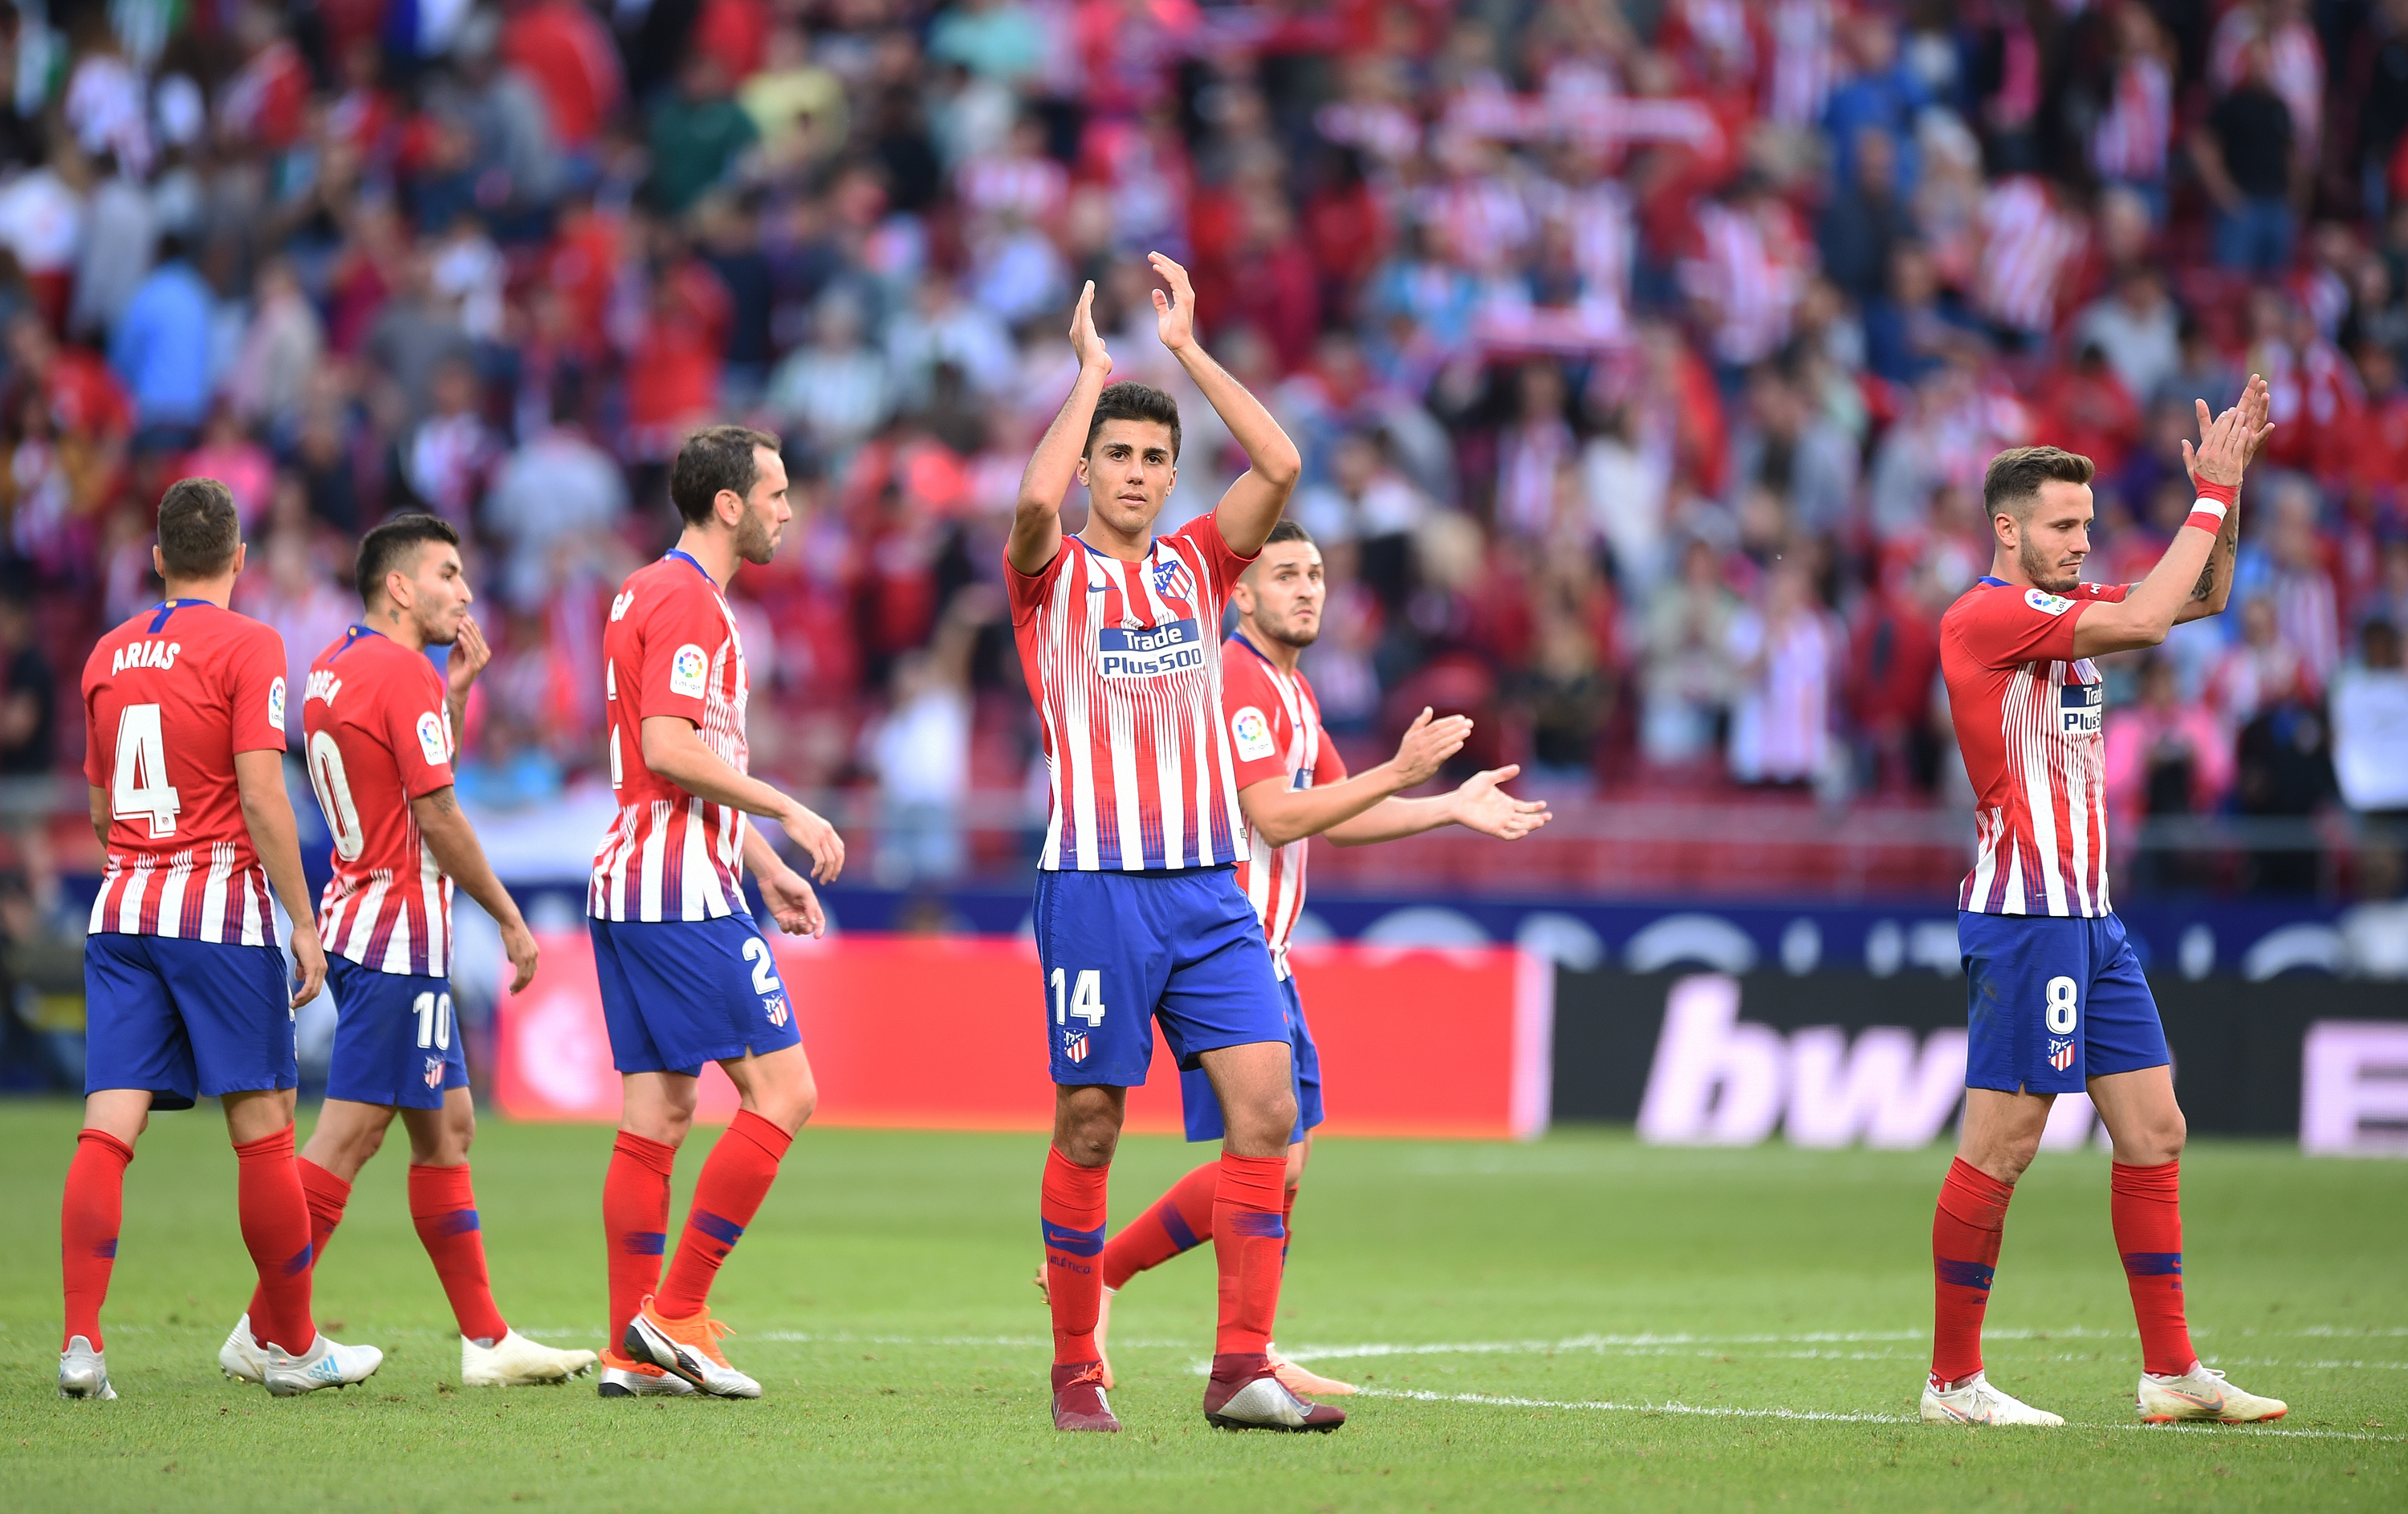 MADRID, SPAIN - OCTOBER 07: Rodrigo Hernandez (C) of Club Atletico de Madrid applauds fans with his teammates after Atletico beat Real Betis Balompie 1-0 in the La Liga match at Wanda Metropolitano on October 7, 2018 in Madrid, Spain. (Photo by Denis Doyle/Getty Images)